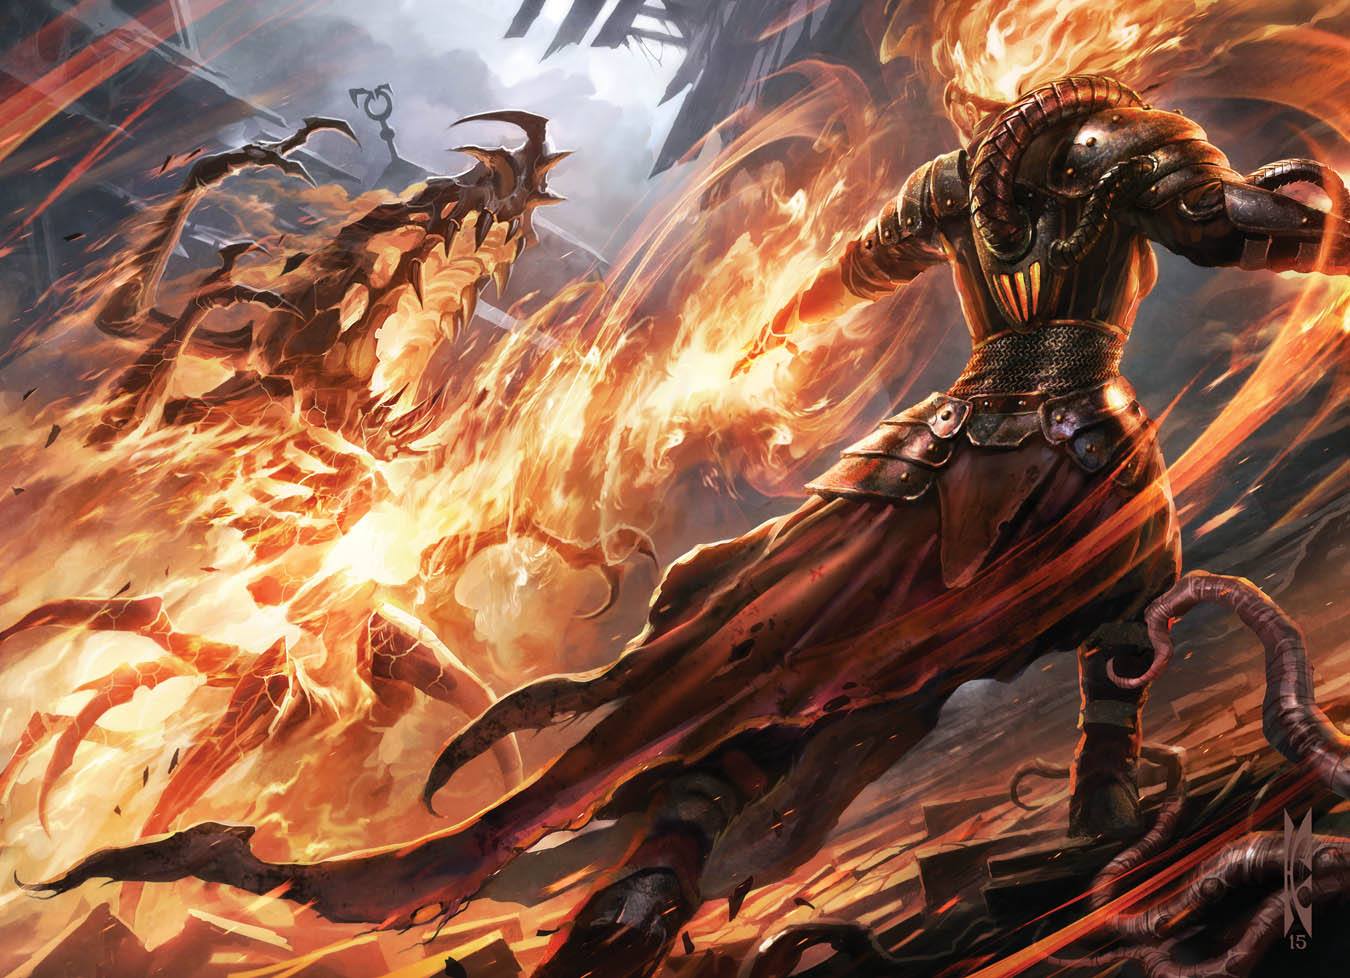 MtG Art: Incendiary Flow from Eldritch Moon Set by Raymond Swanland